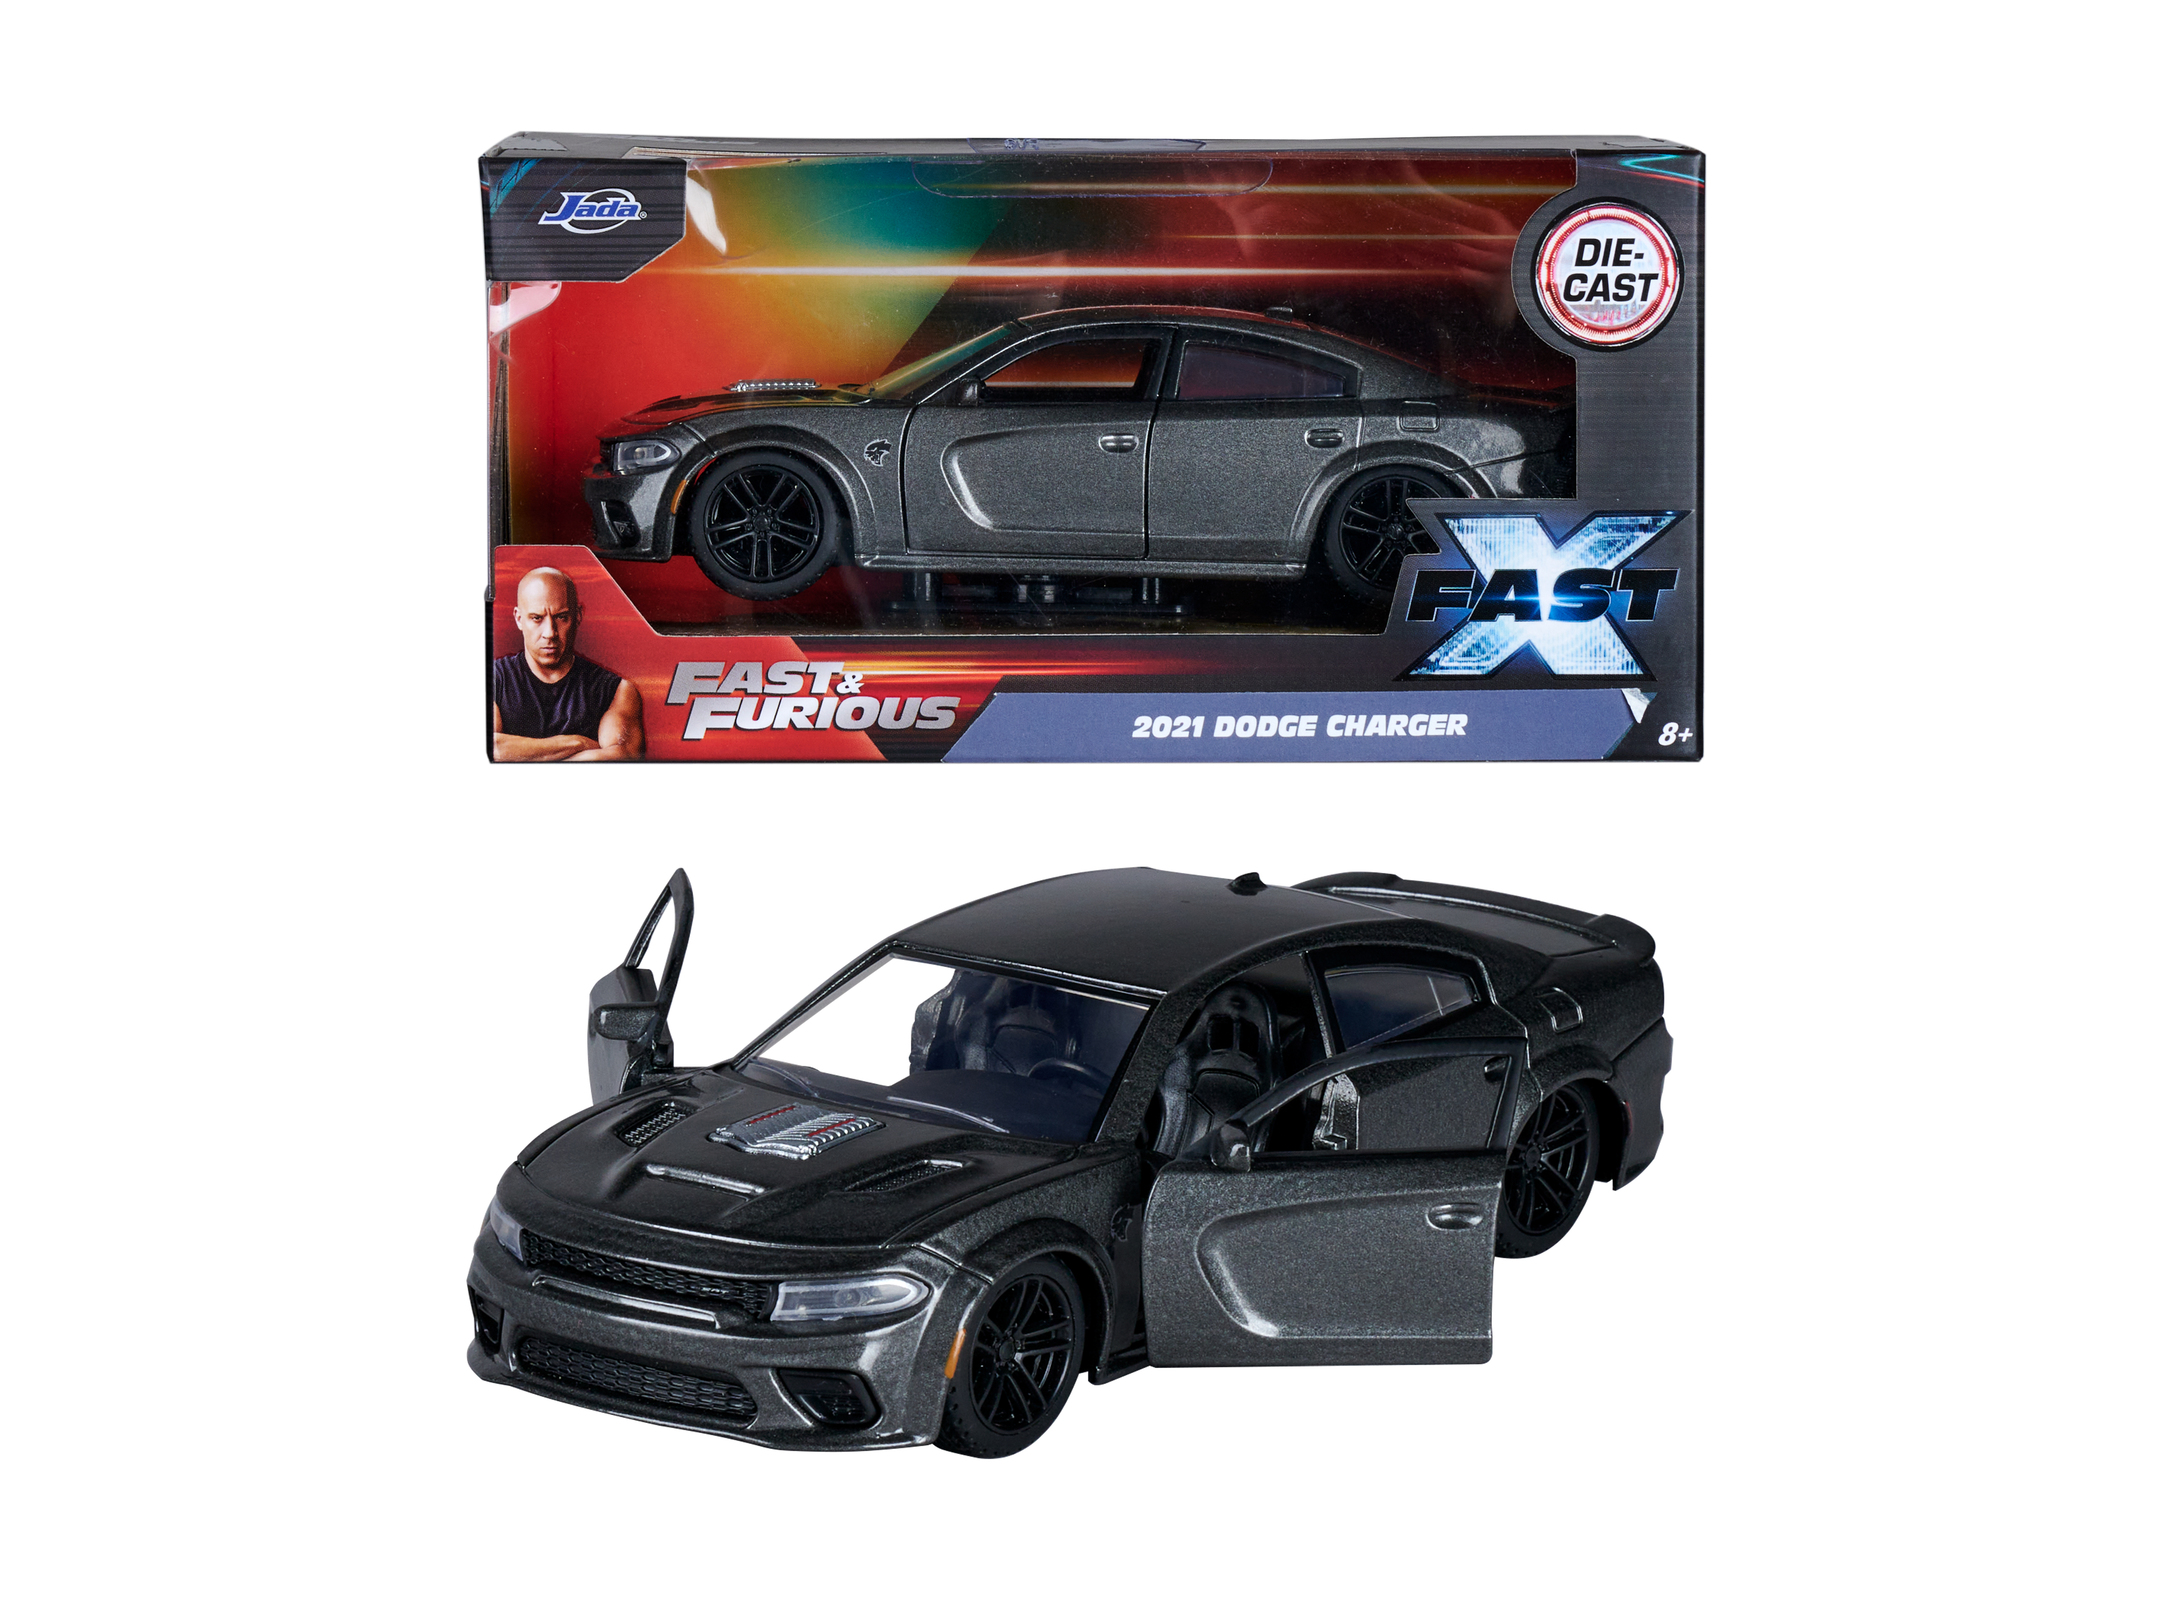 Fast & Furious Dodge Charger 1:24